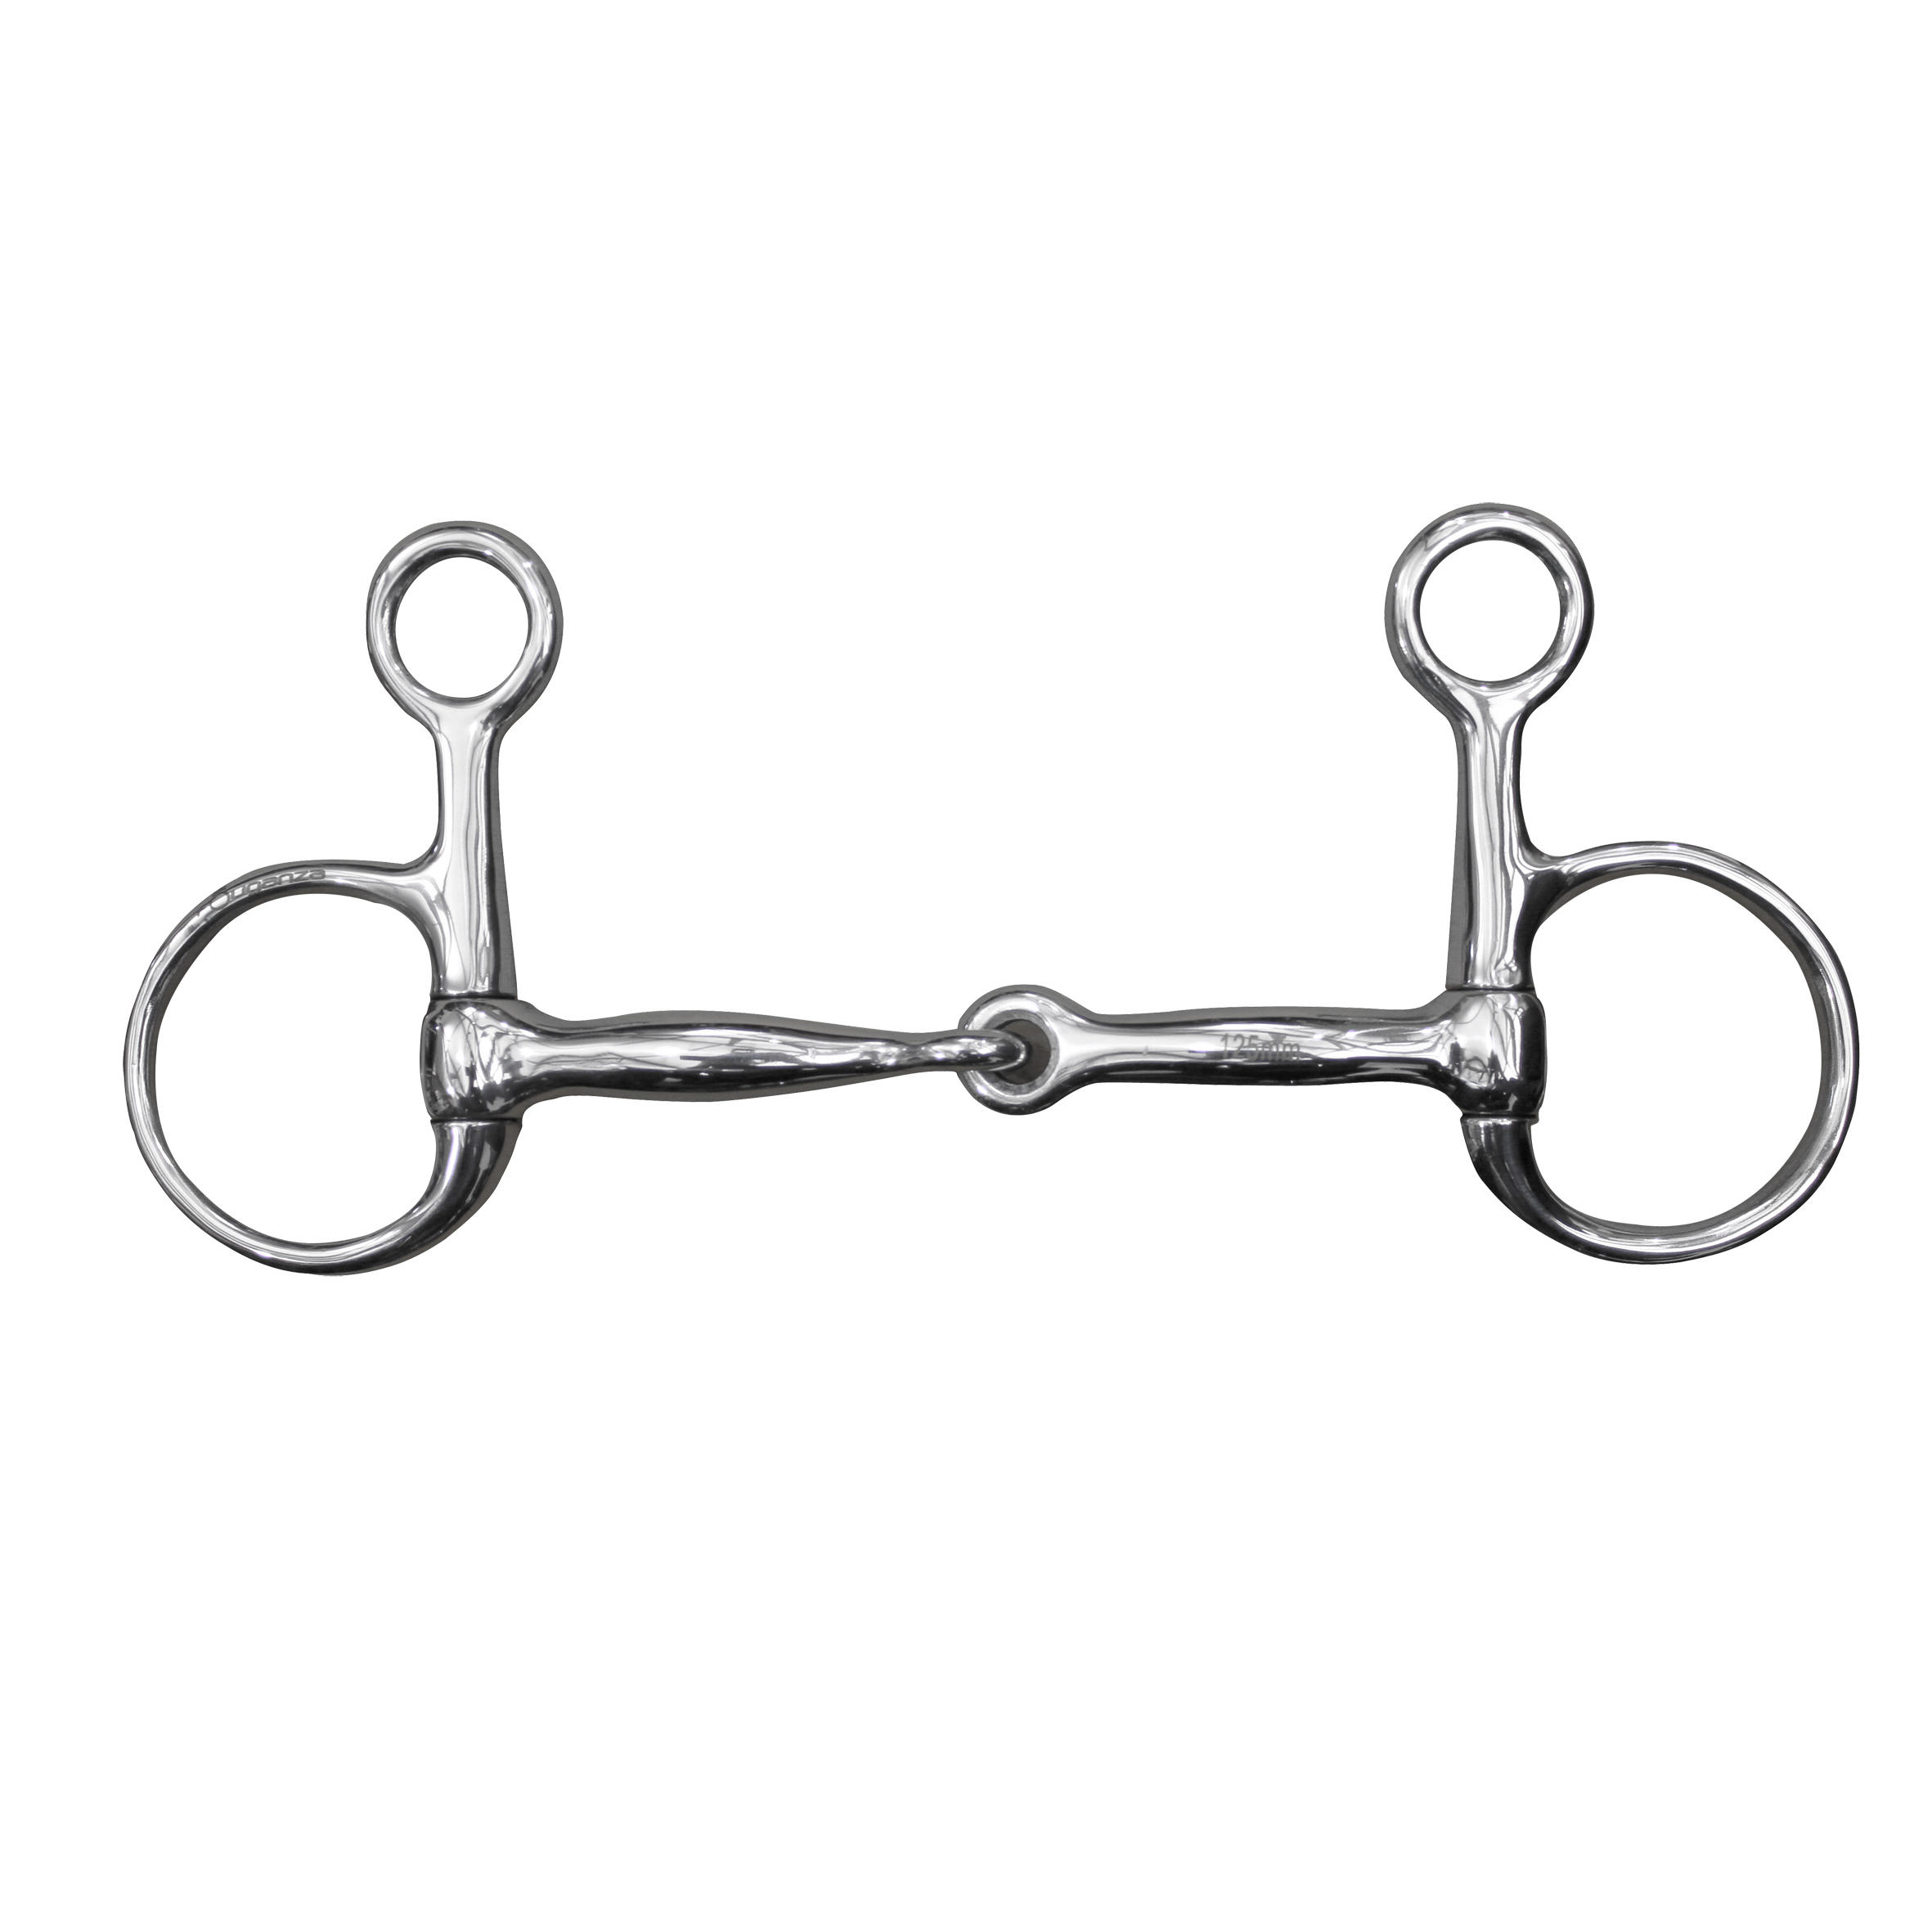 FOUGANZA Baucher Stainless Steel Horse Riding Snaffle Bit For Horse/Pony